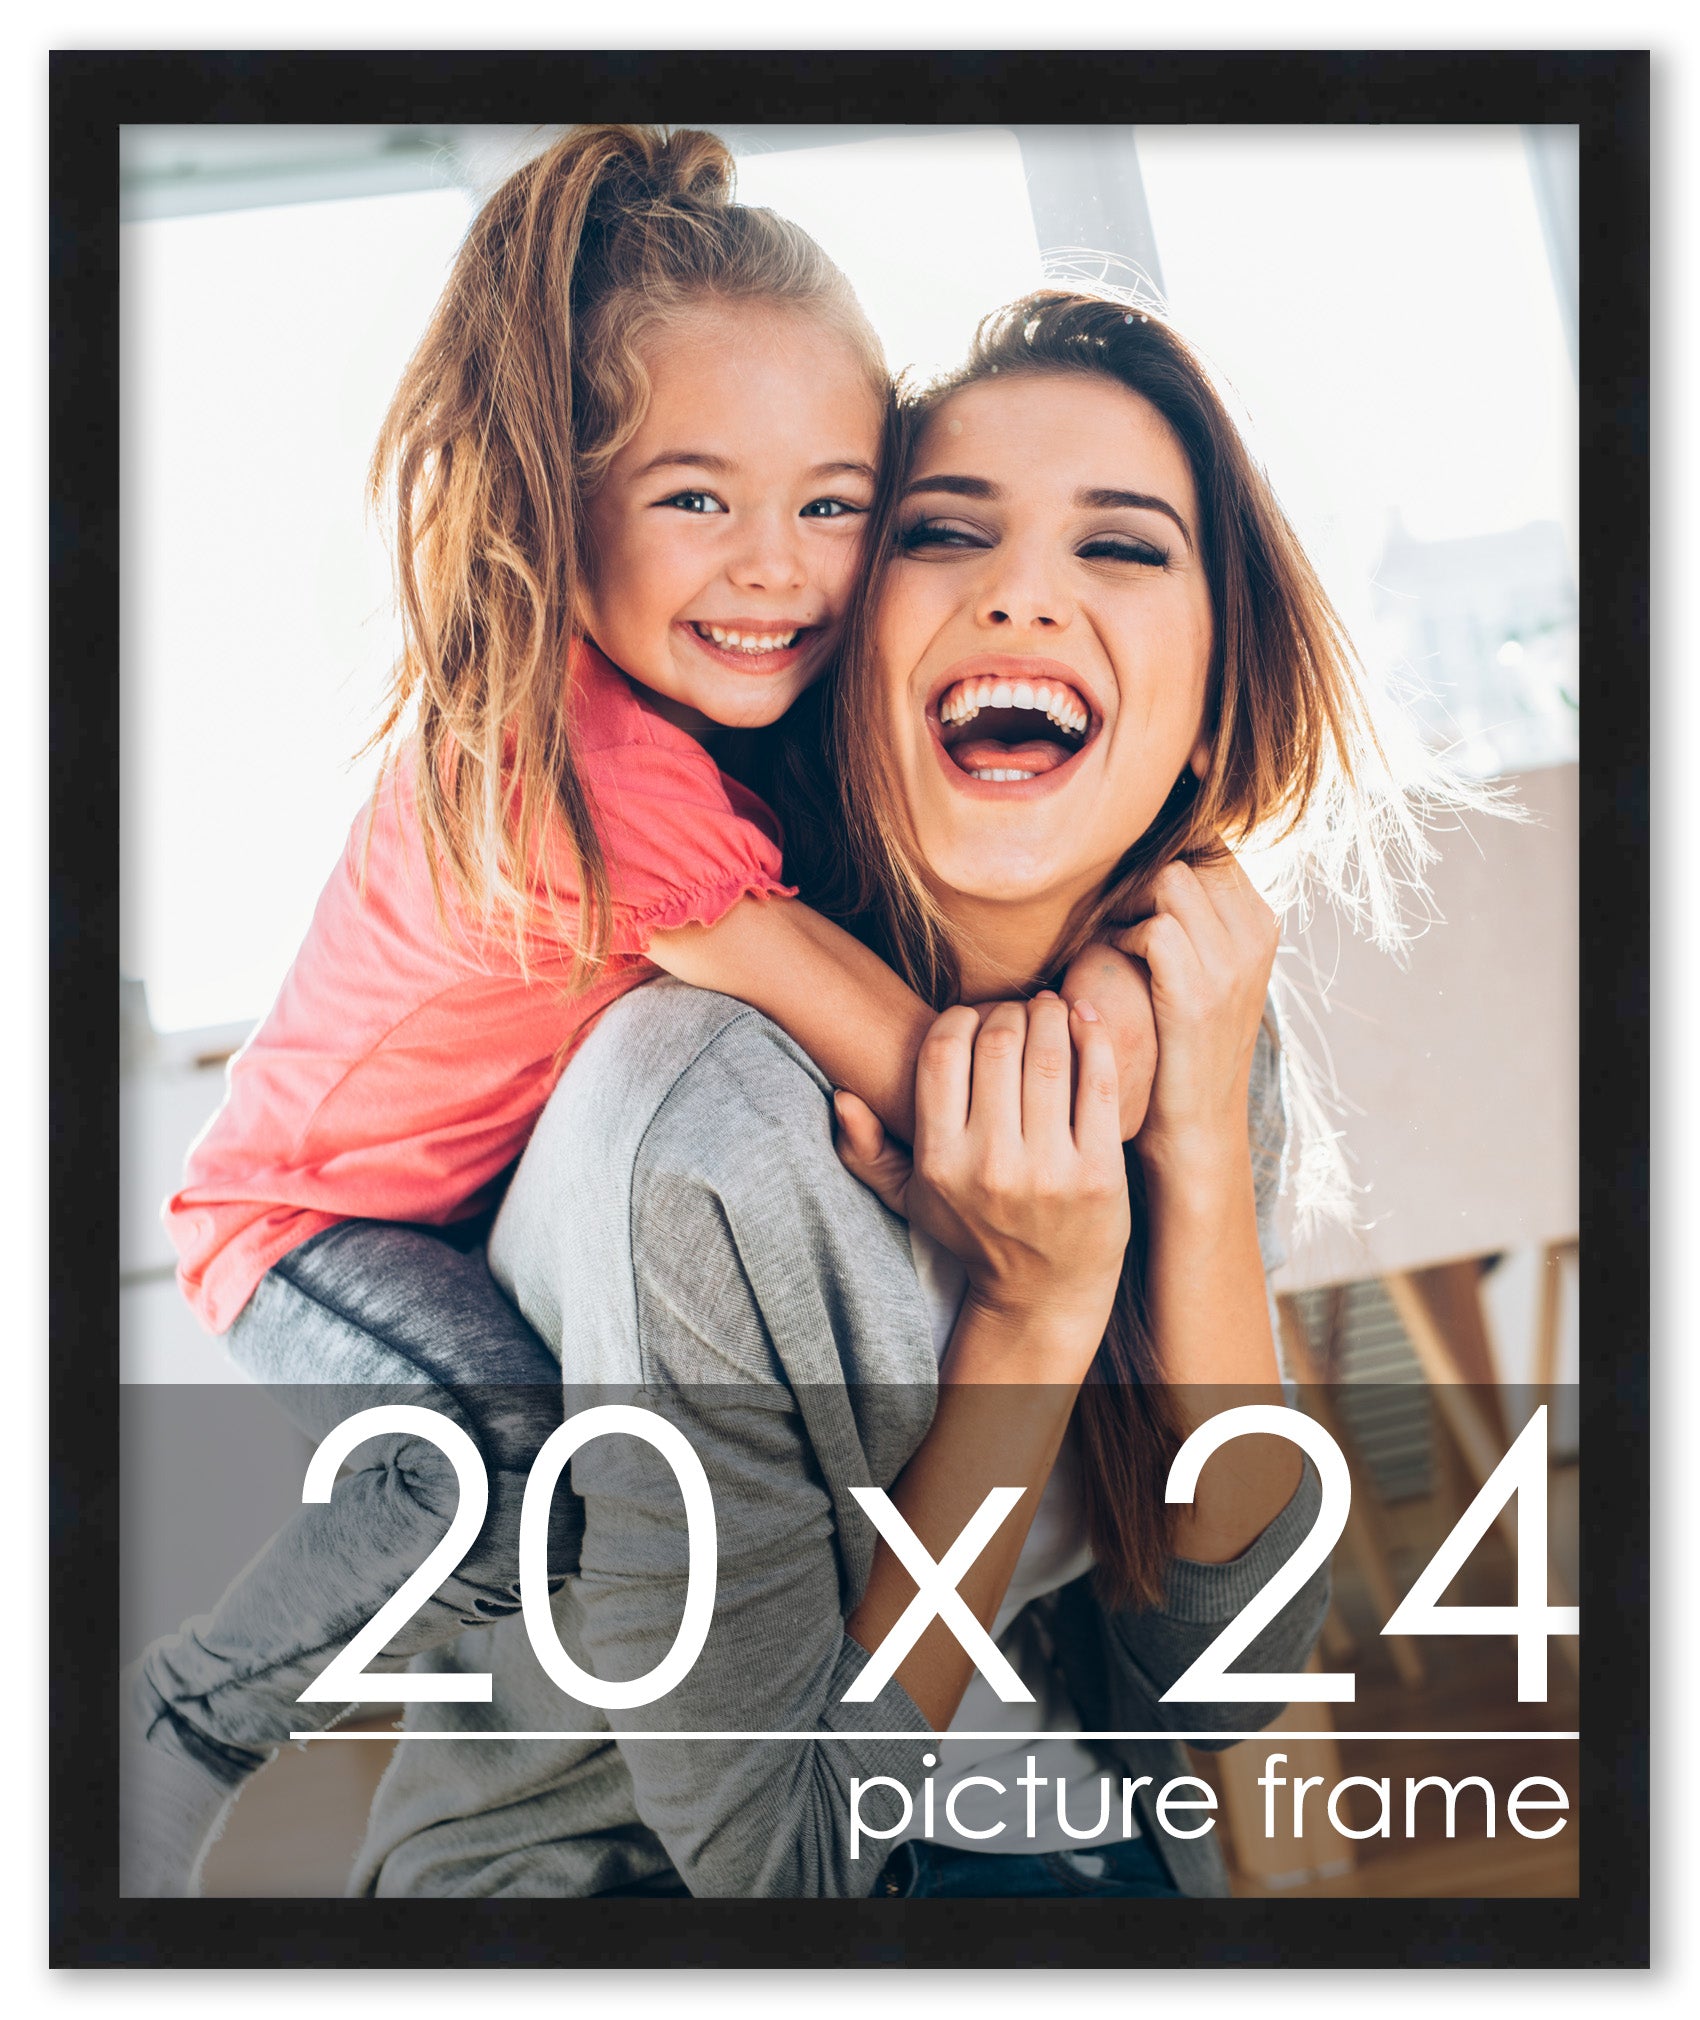 20x24 Frame Black Solid Wood Picture Frame - UV Acrylic Plexiglass, Foam Board Backing aaa Hanging Hardware Included